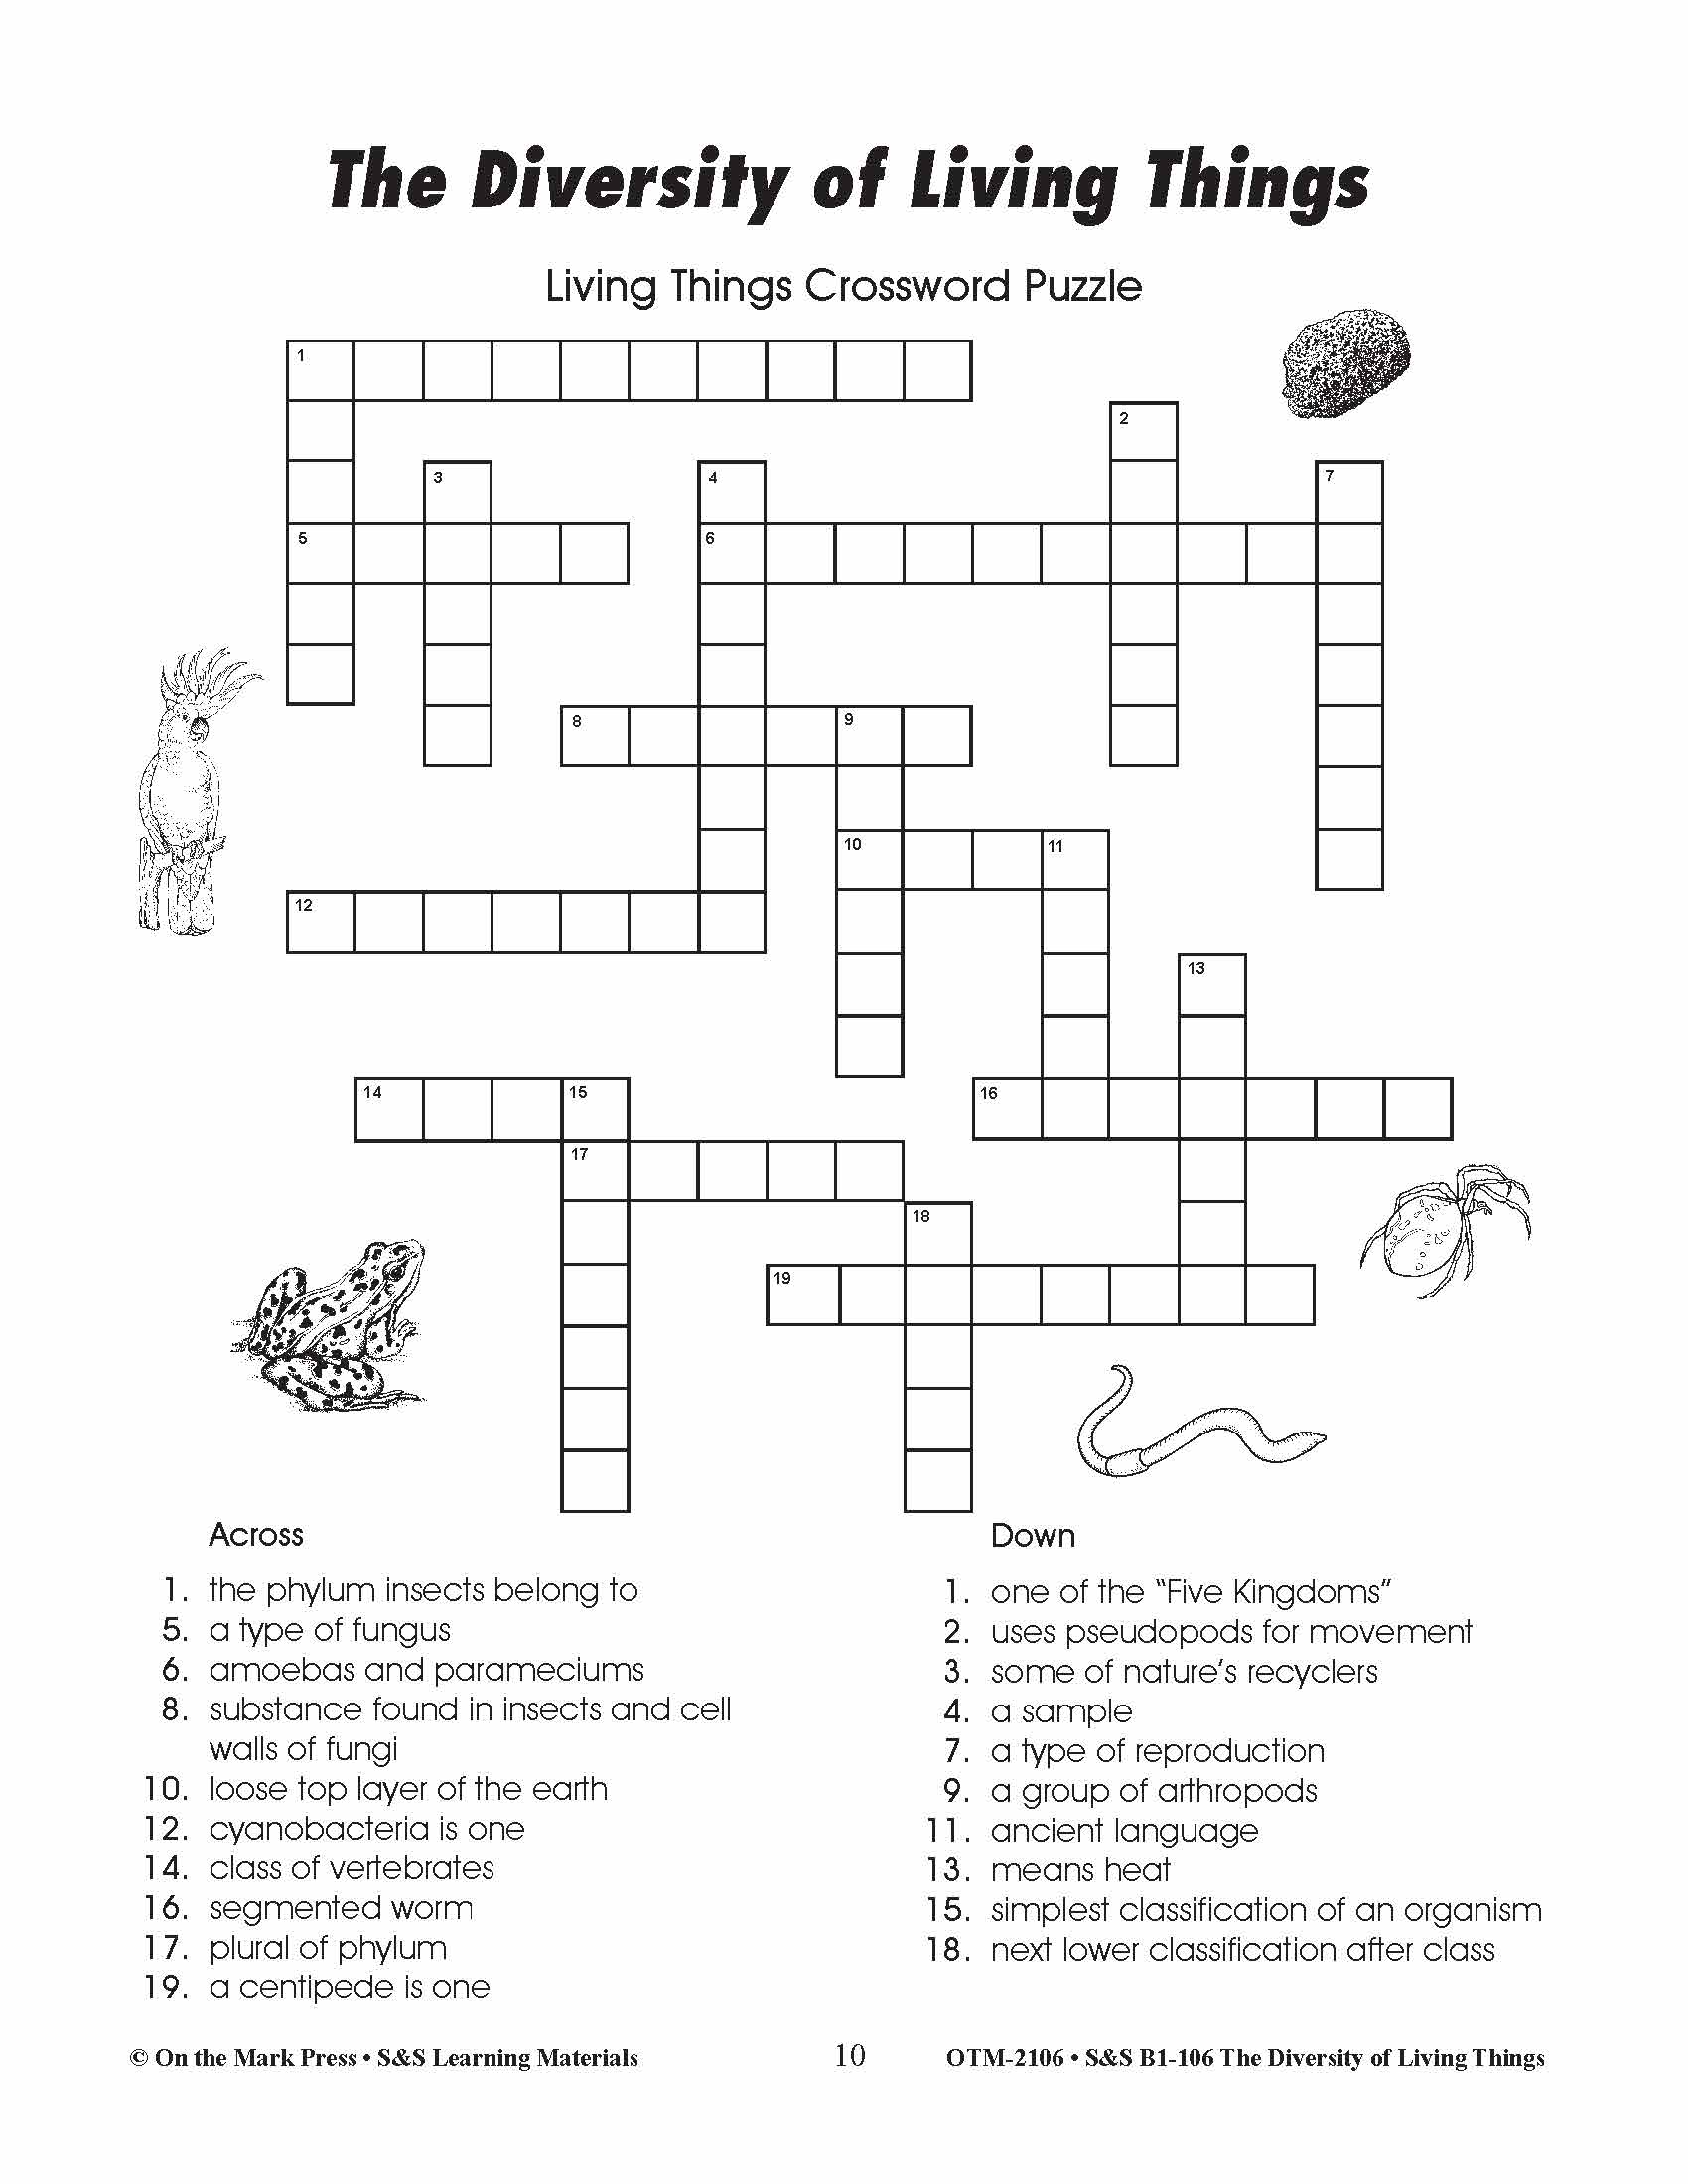 Diversity of Living Things Crossword Puzzle Grades 4 6